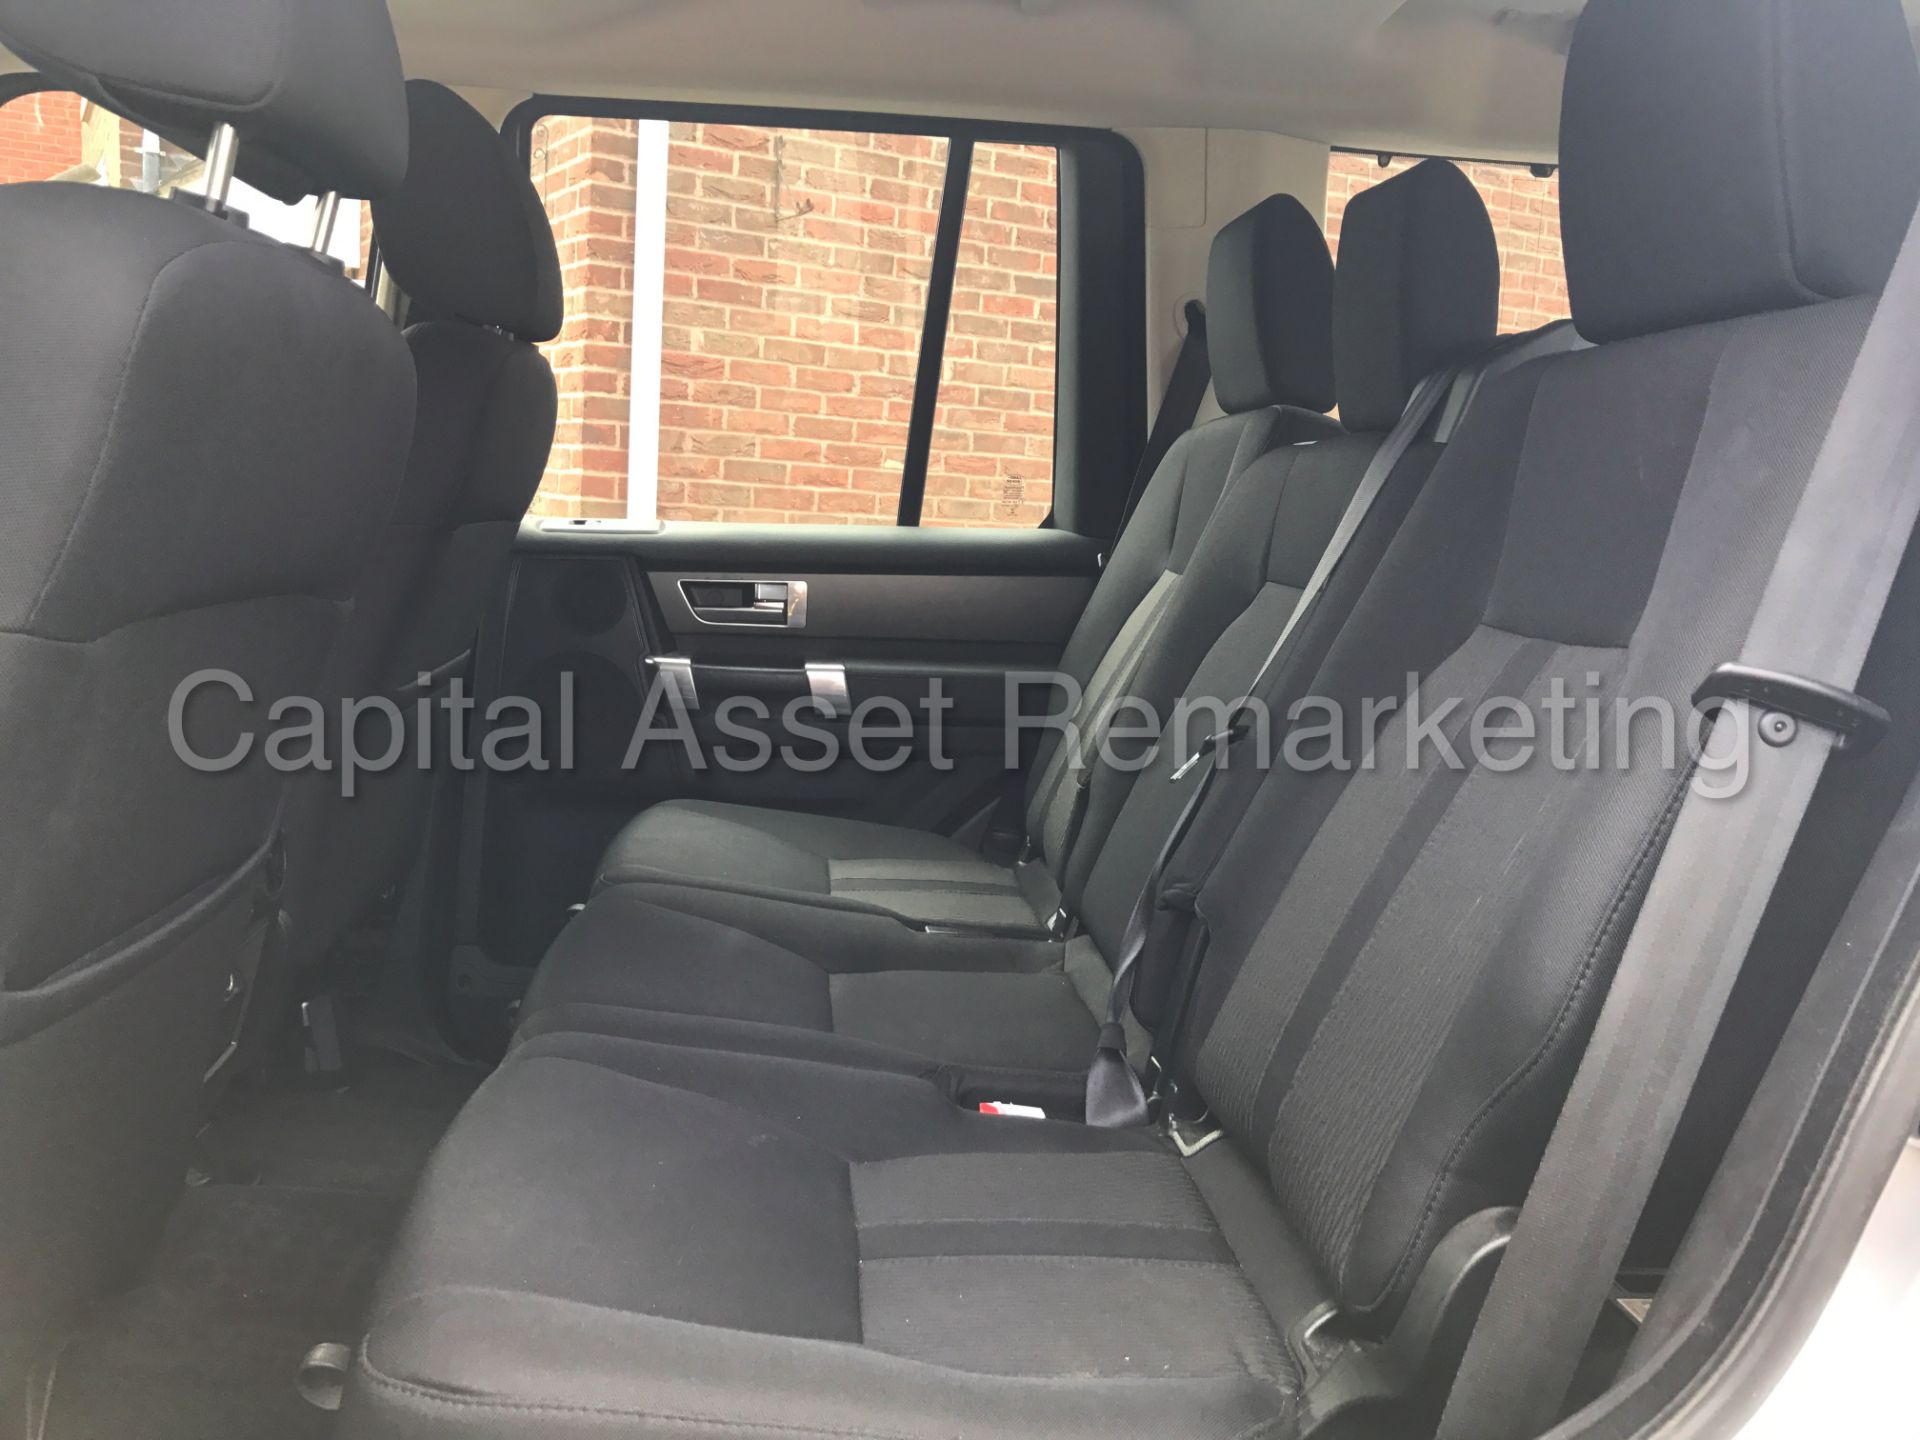 LAND ROVER DISCOVERY 4 (2014 MODEL) '3.0 SDV6 - 8 SPEED AUTO - 7 SEATER' **HUGE SPEC** (1 OWNER) - Image 25 of 30